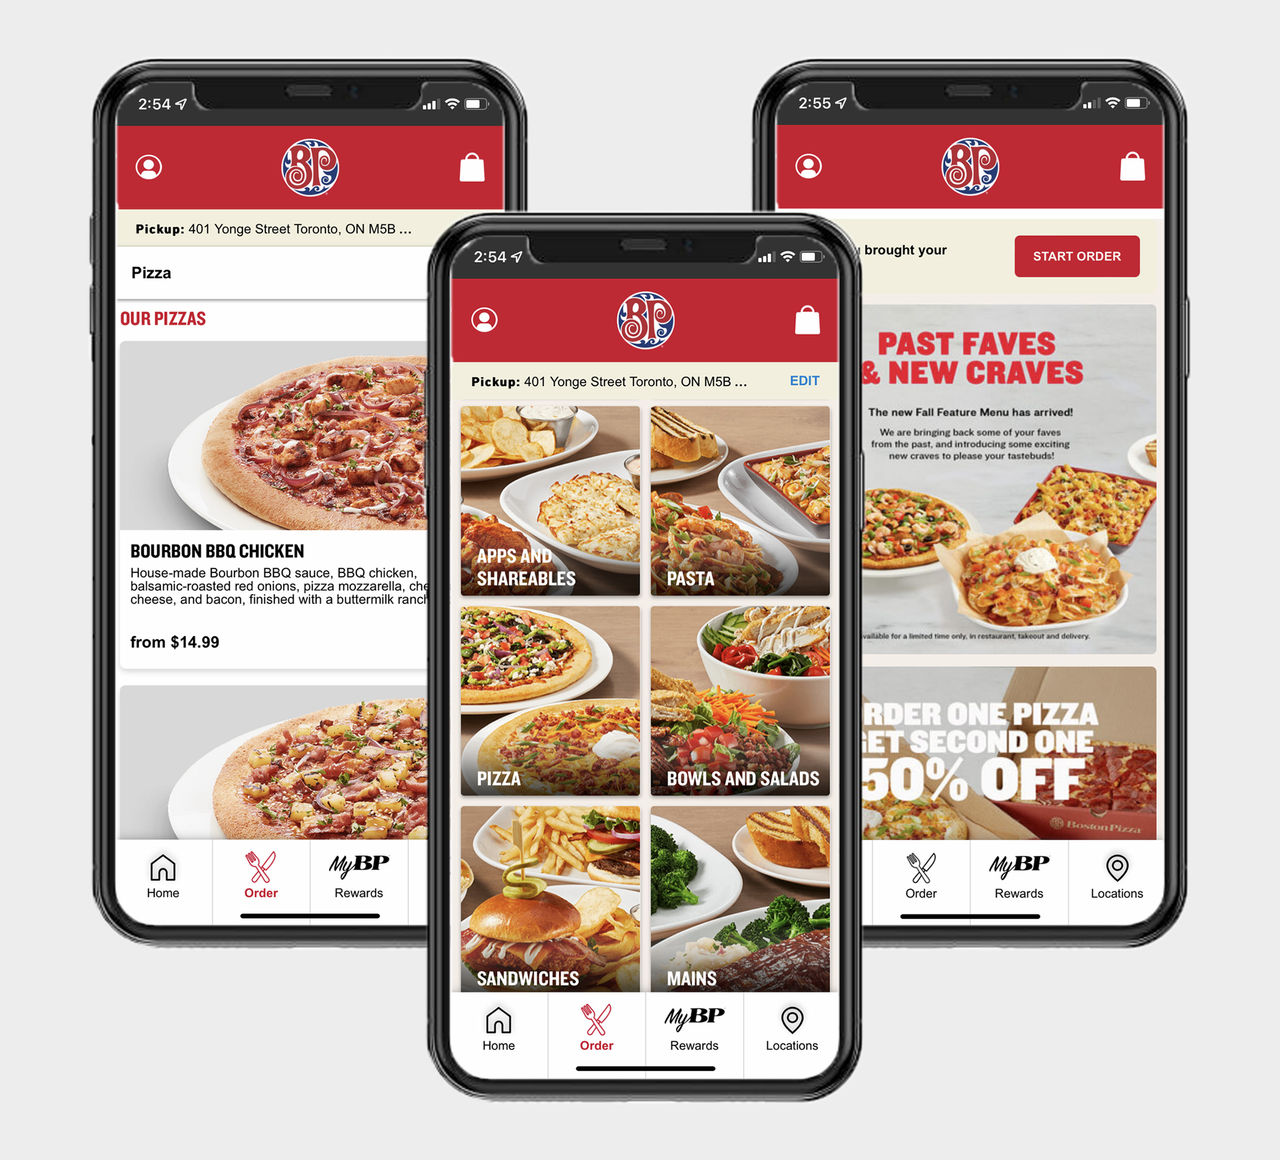 Apps & Shareables  Boston Pizza Takeout and Delivery Menu